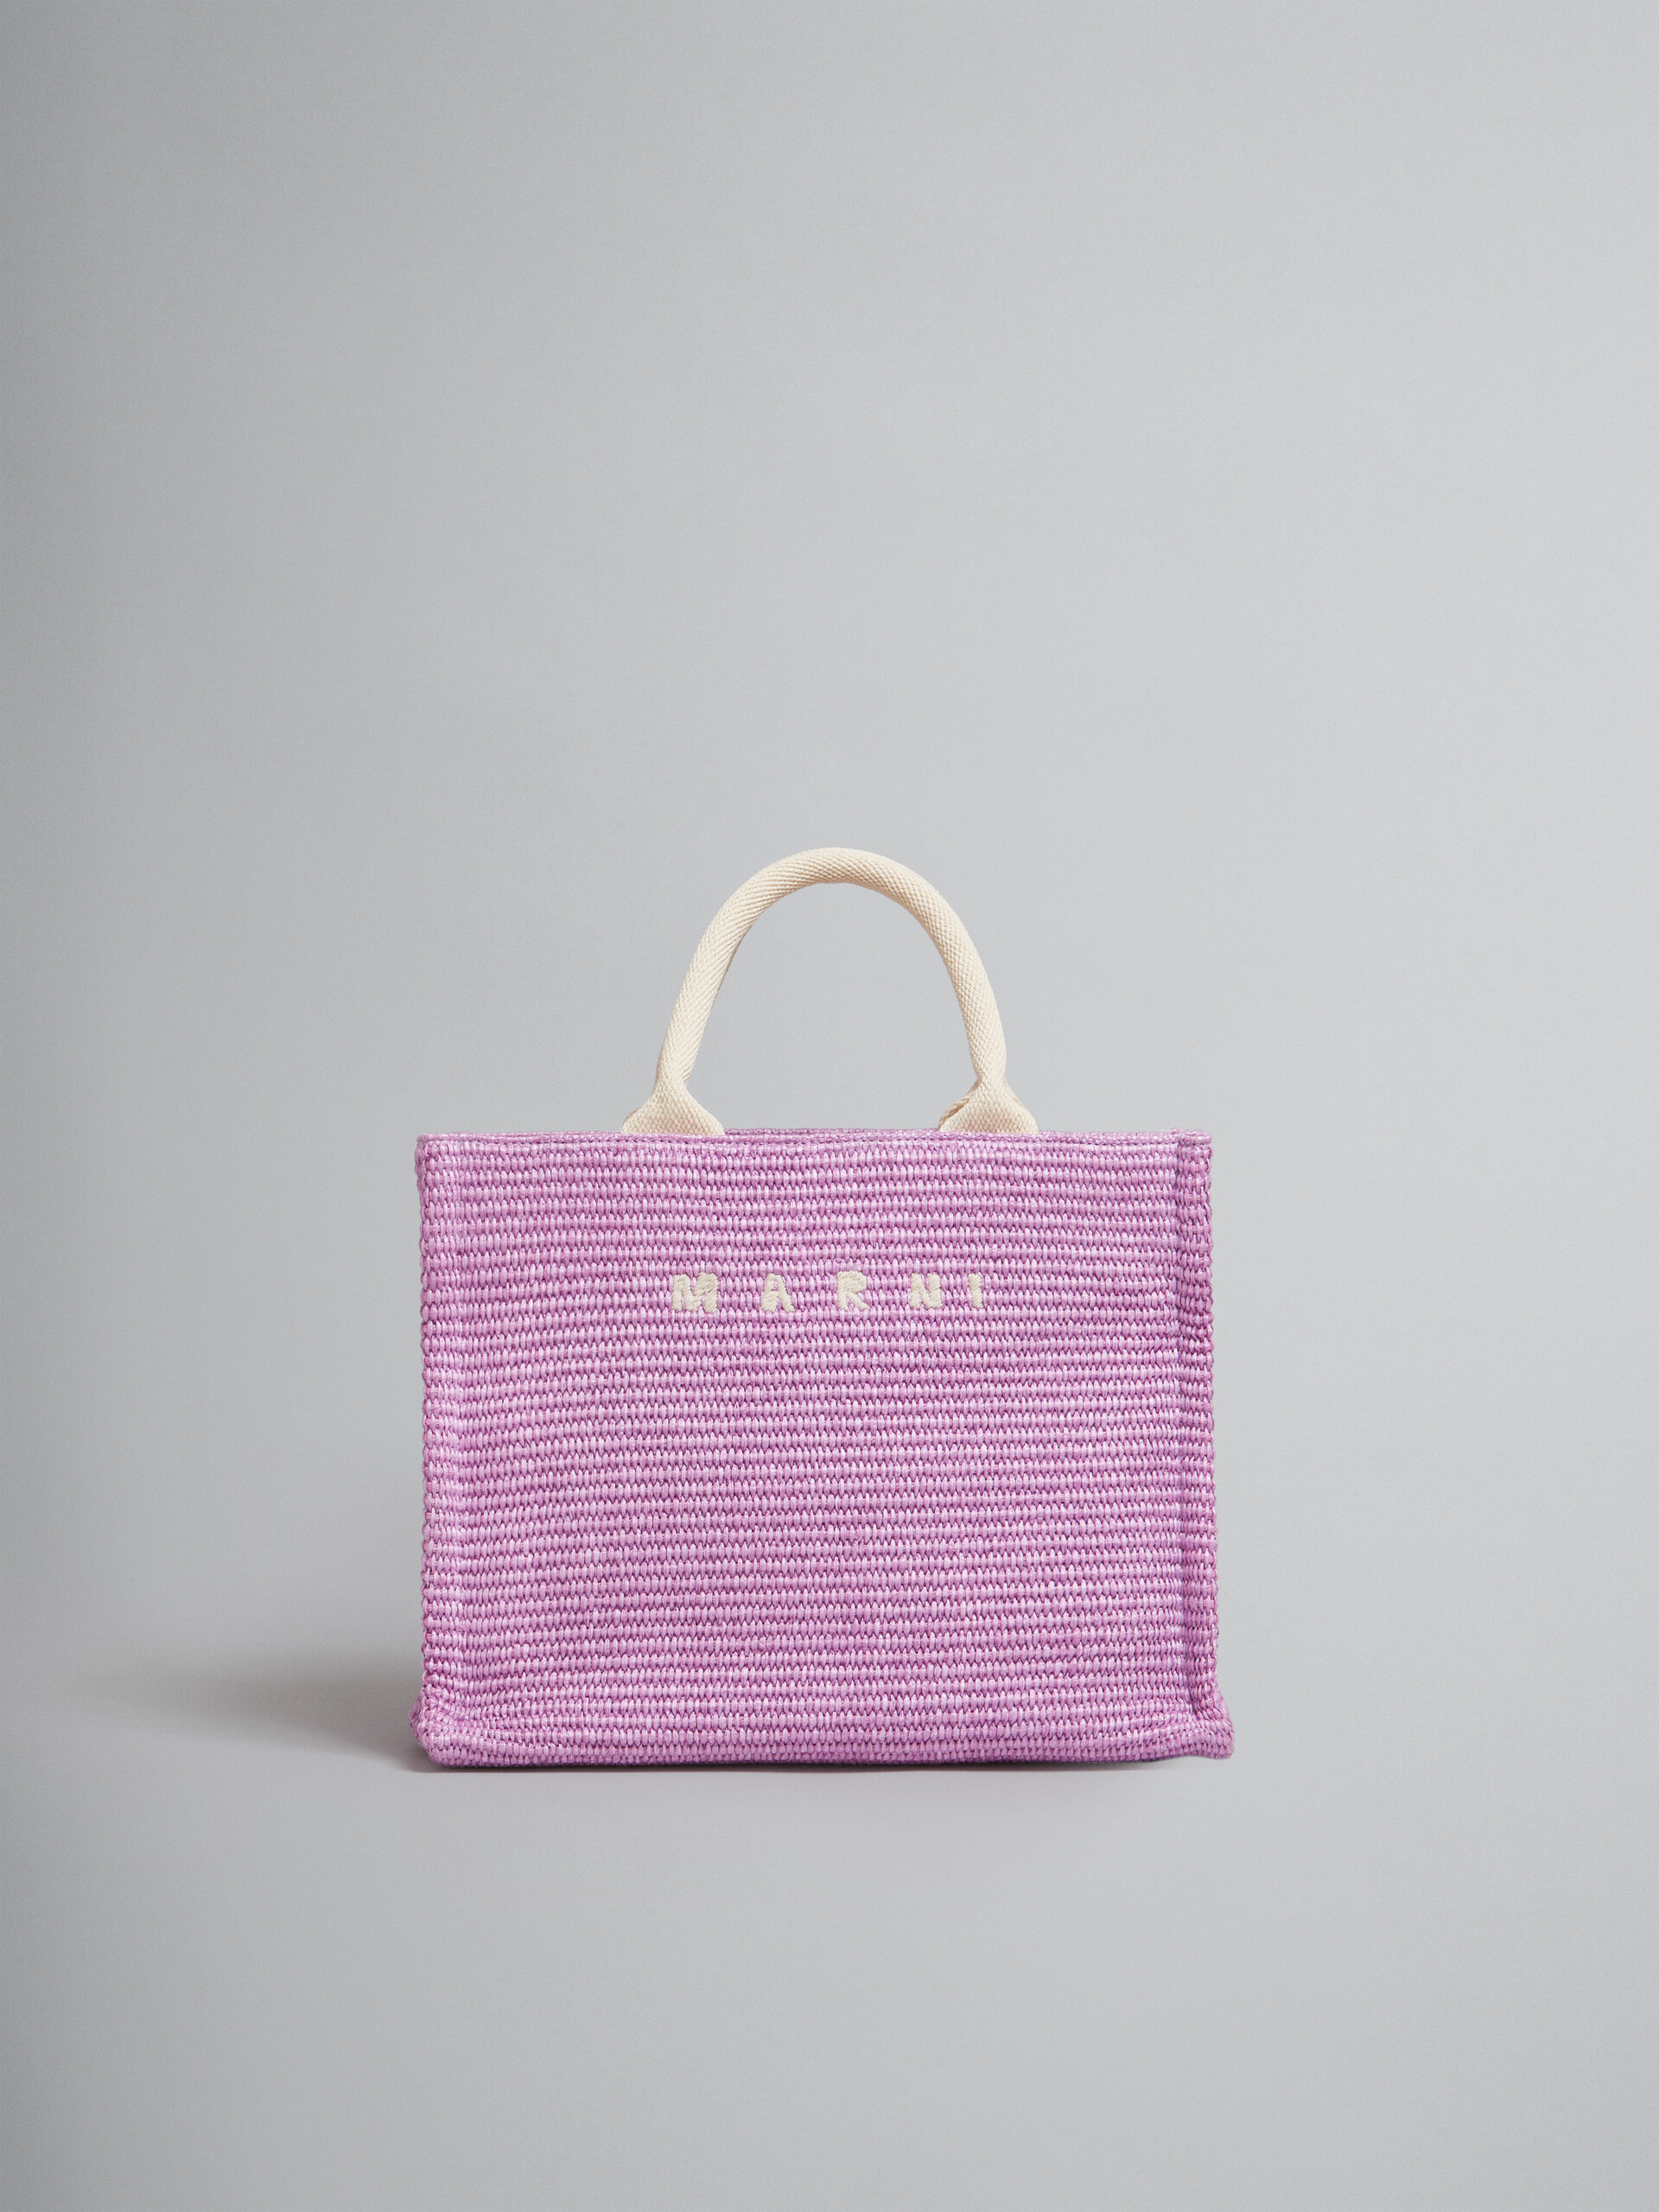 Small Tote in lilac raffia-effect fabric - Shopping Bags - Image 1